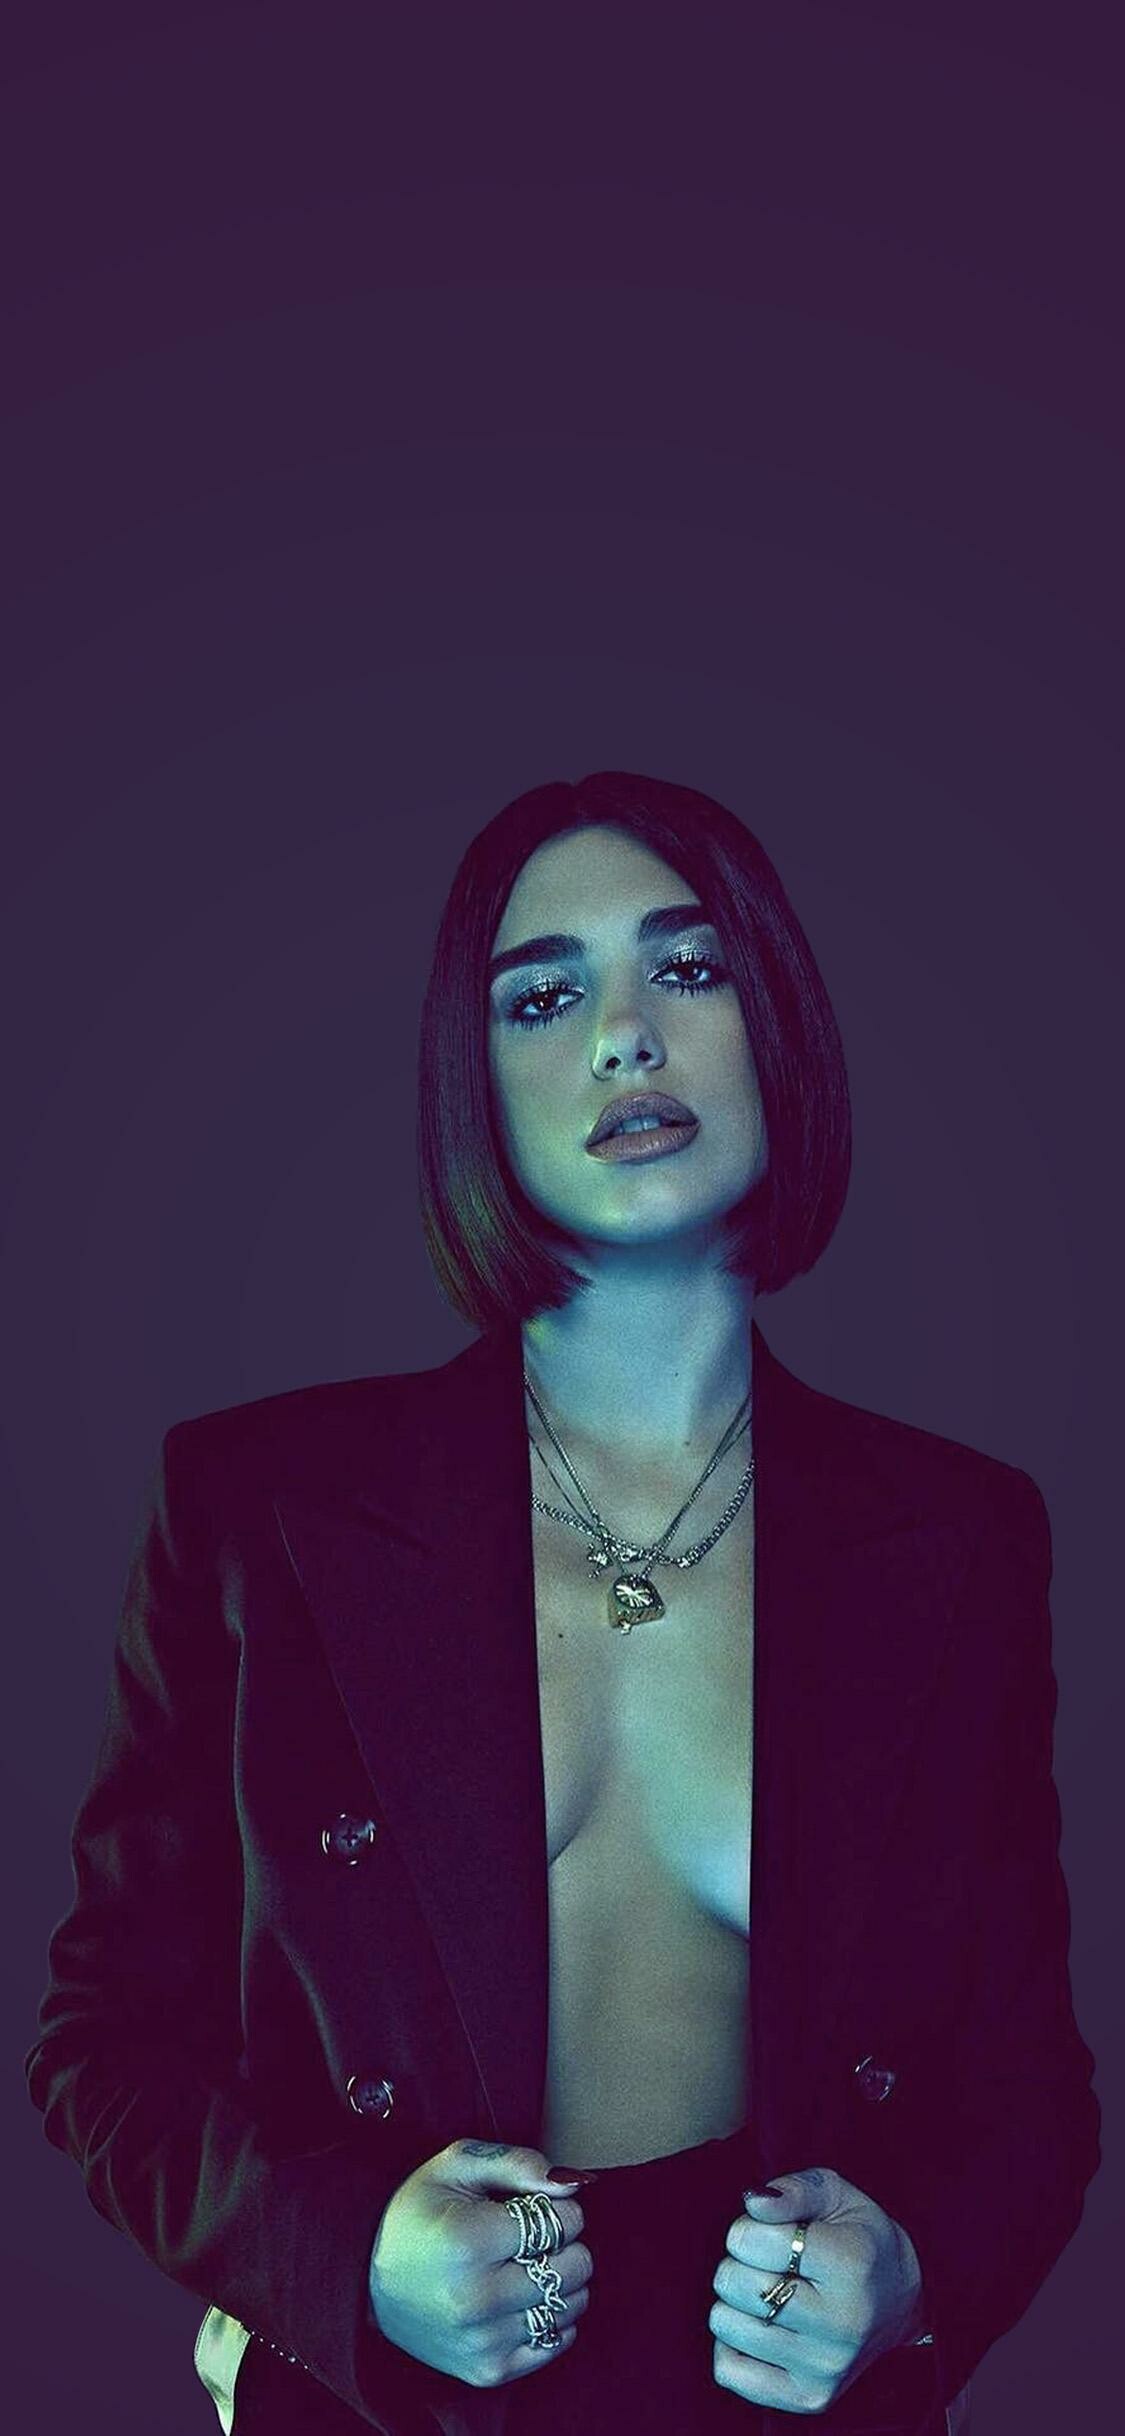 Dua Lipa: "Fever", featuring Belgian singer Angèle, was released on 29 October 2020. 1130x2440 HD Background.